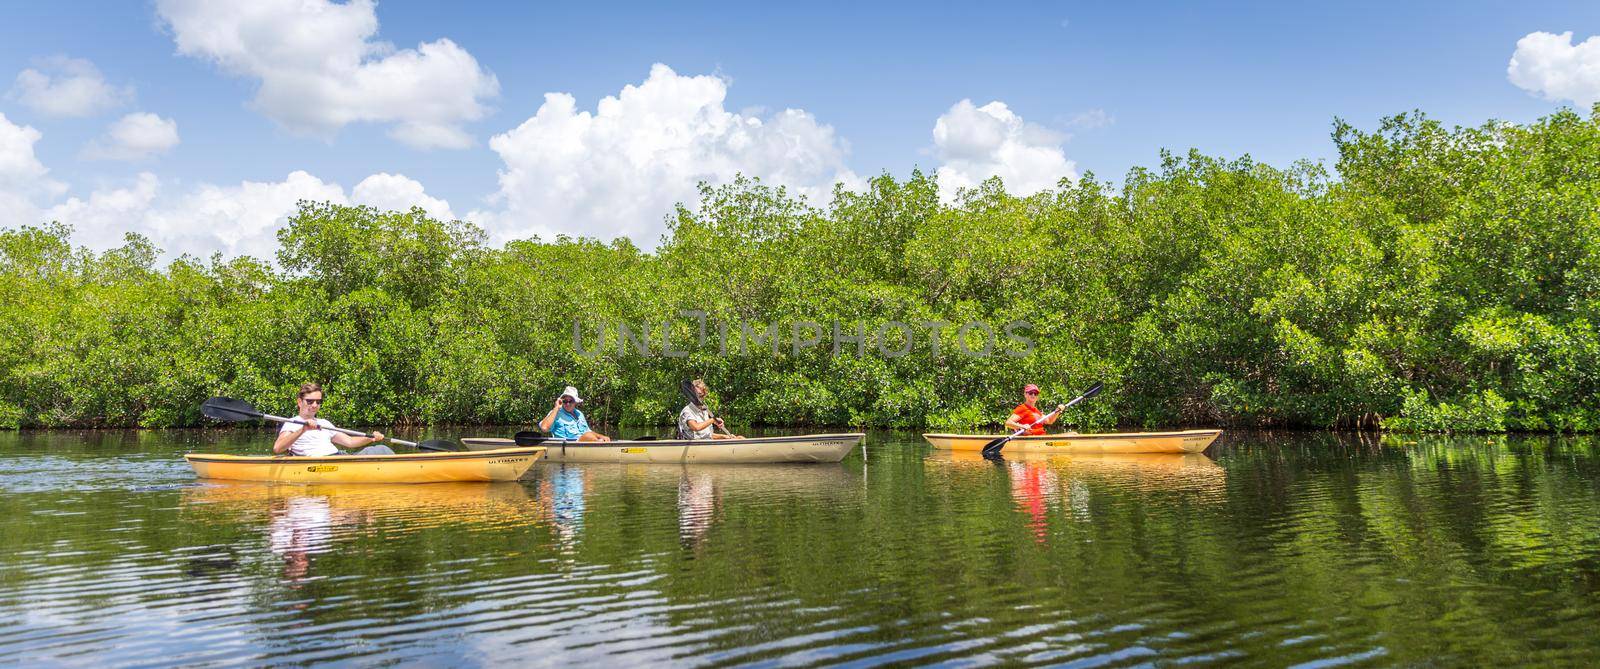 Tourist kayaking in mangrove forest by Mariakray